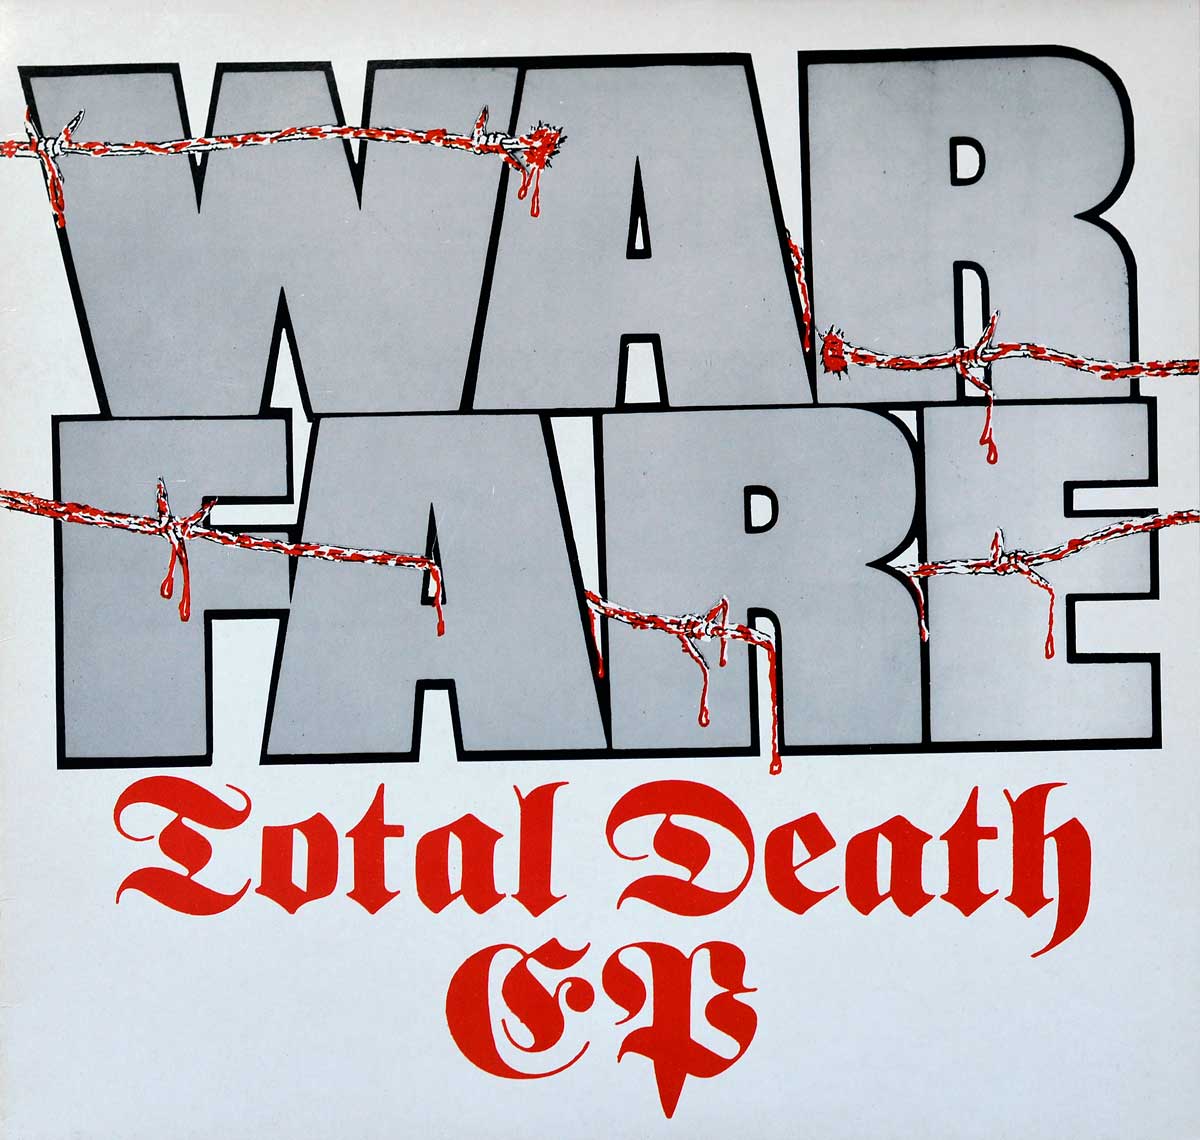 High Quality Photo of Album Front Cover  "WARFARE Total Death"